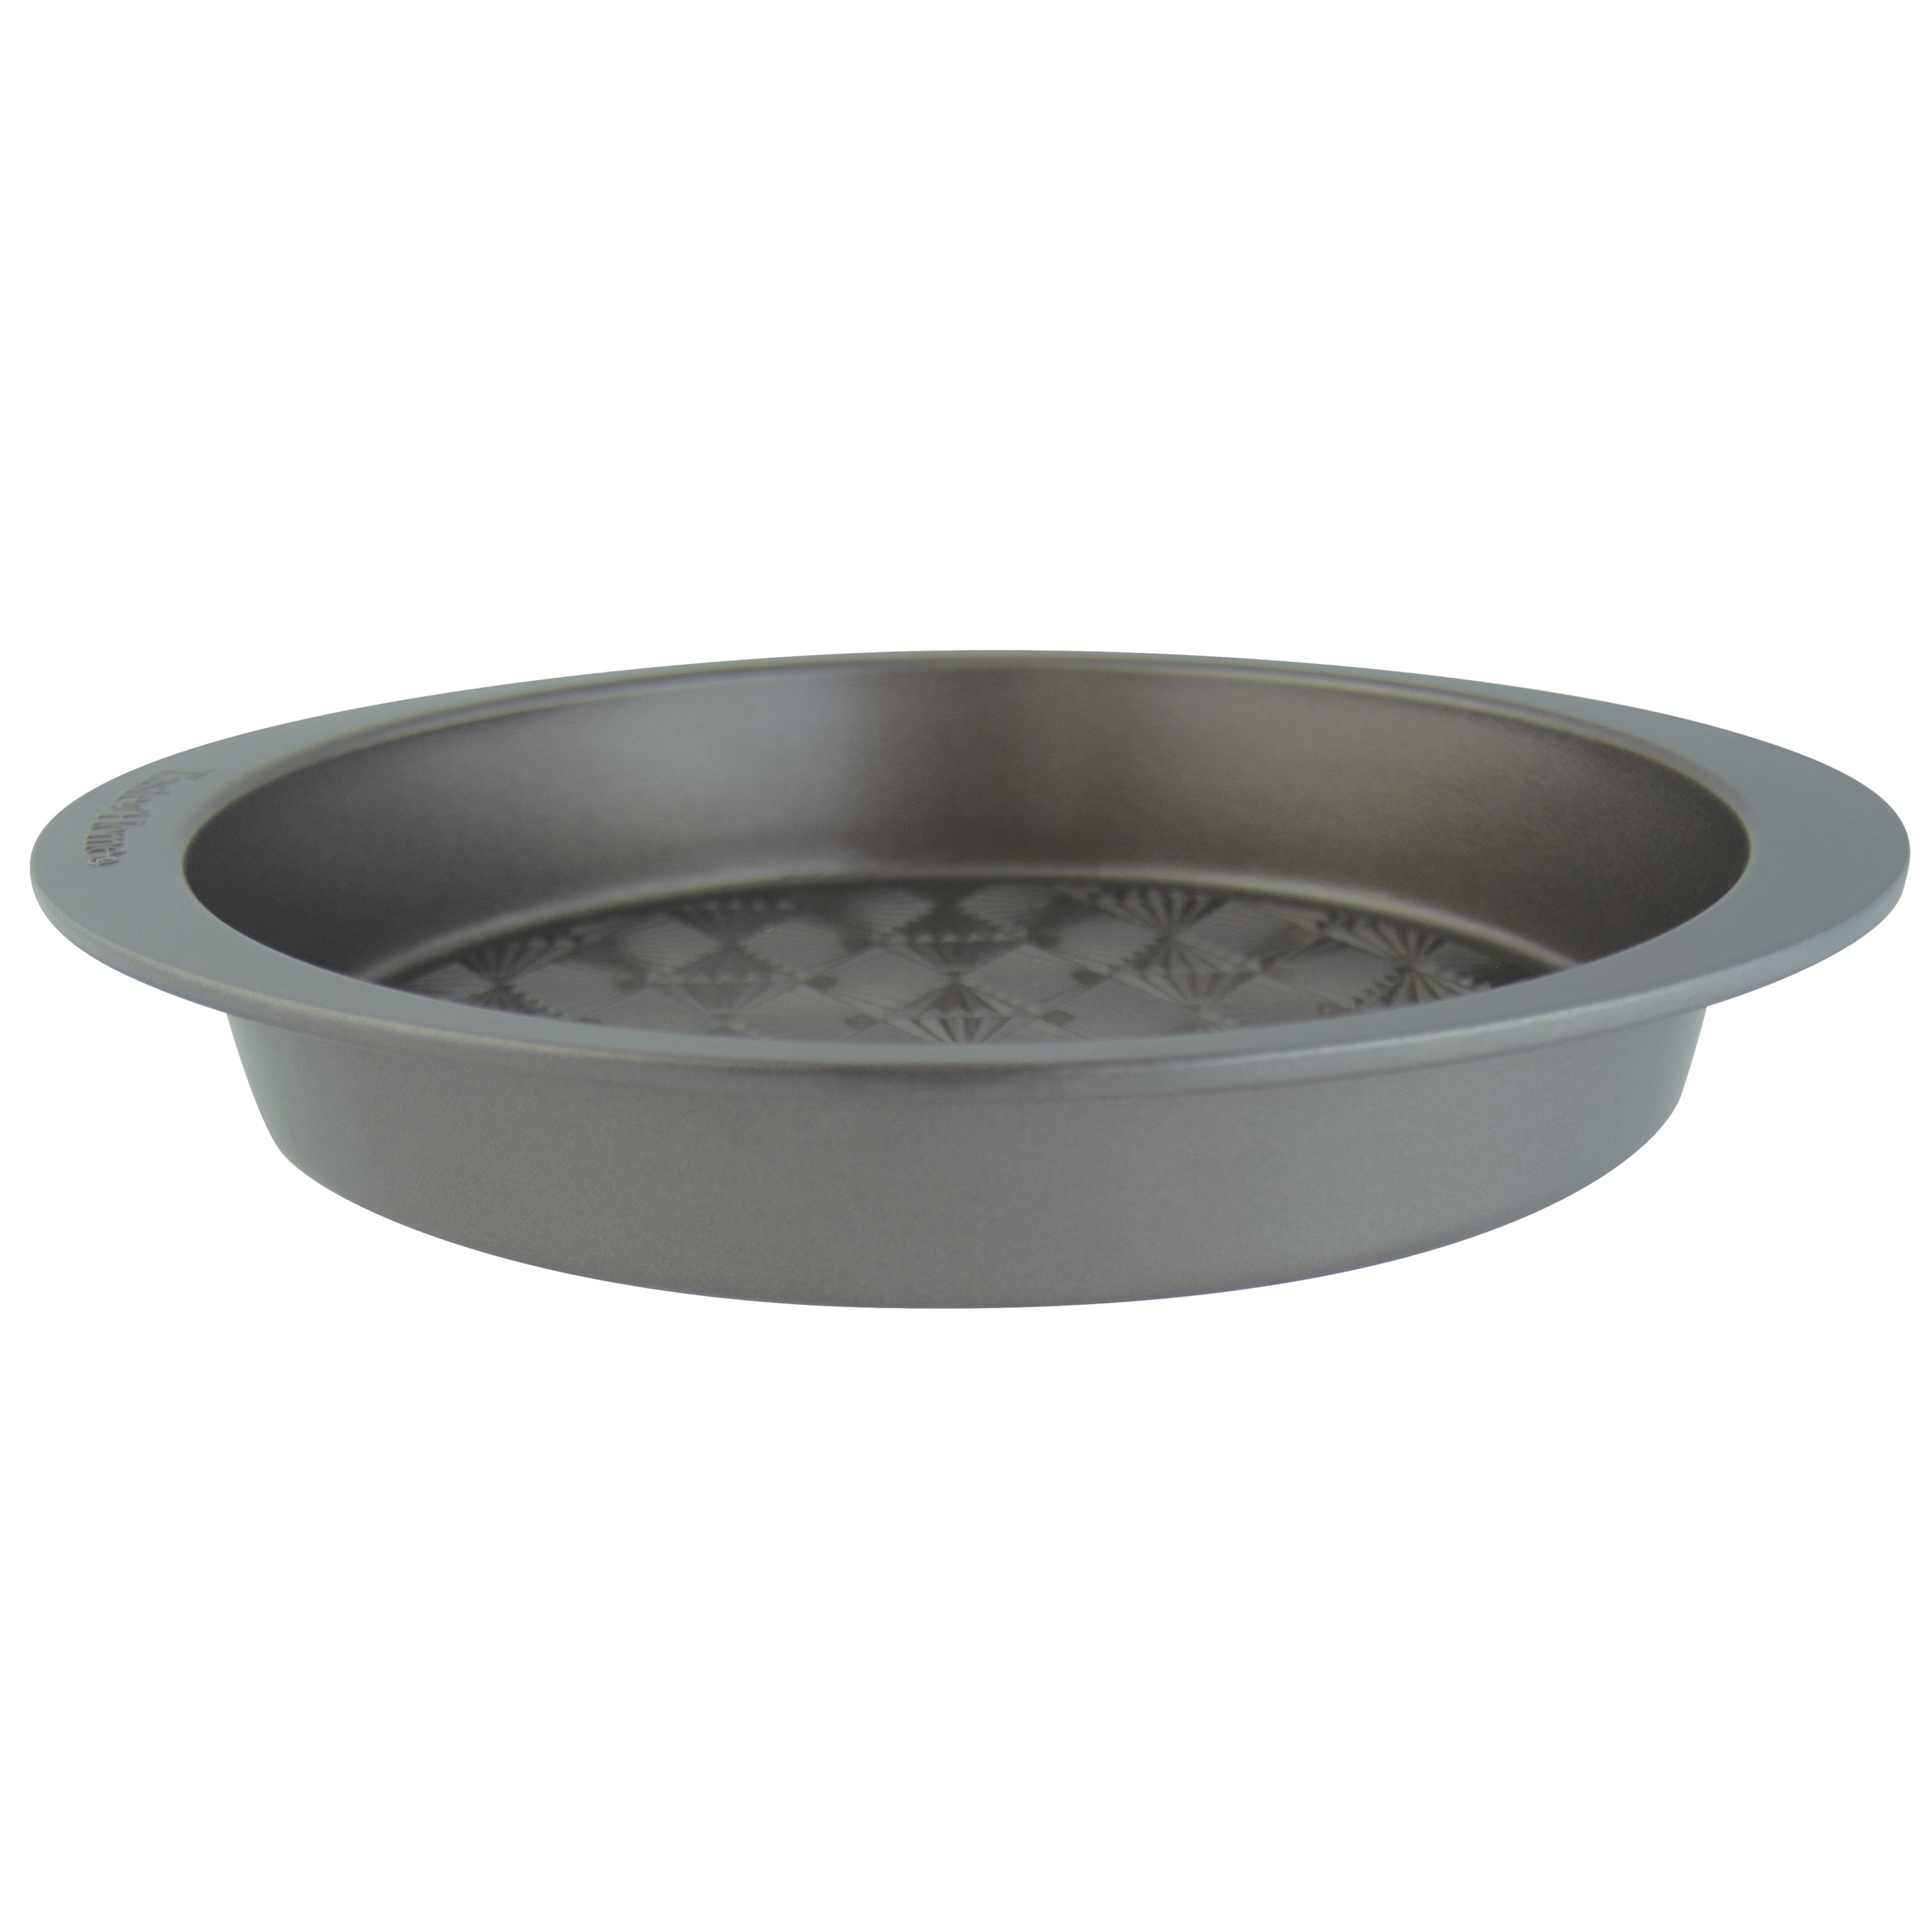 https://ak1.ostkcdn.com/images/products/is/images/direct/3475ca21063af69939b2eb6a7f1176a11f74b4be/Taste-of-Home-9-inch-Non-Stick-Metal-Round-Baking-Pan.jpg